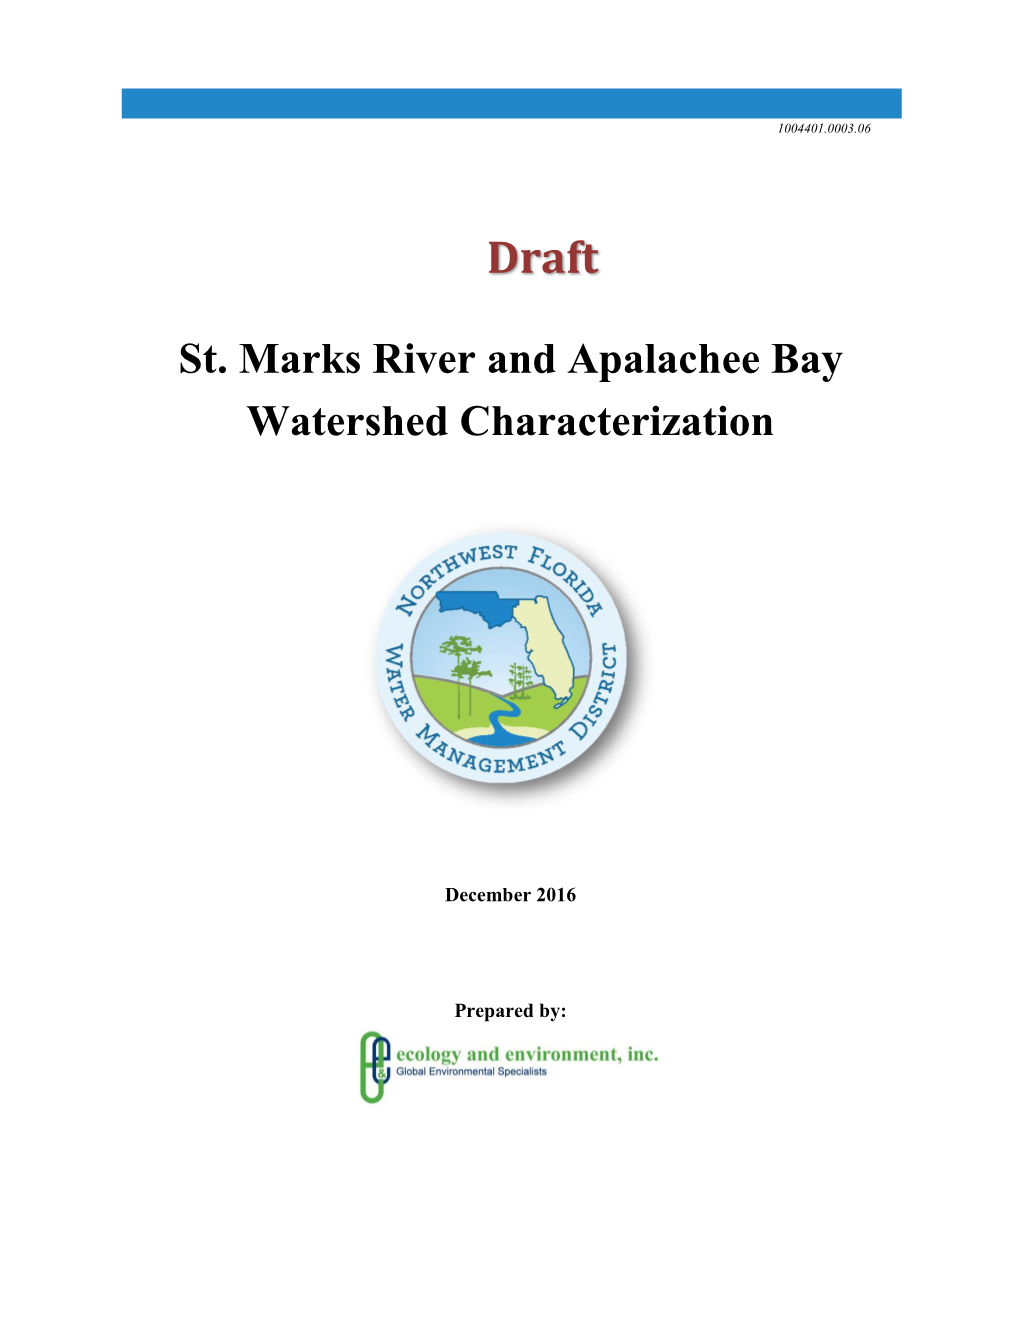 St. Marks River and Apalachee Bay Watershed Characterization